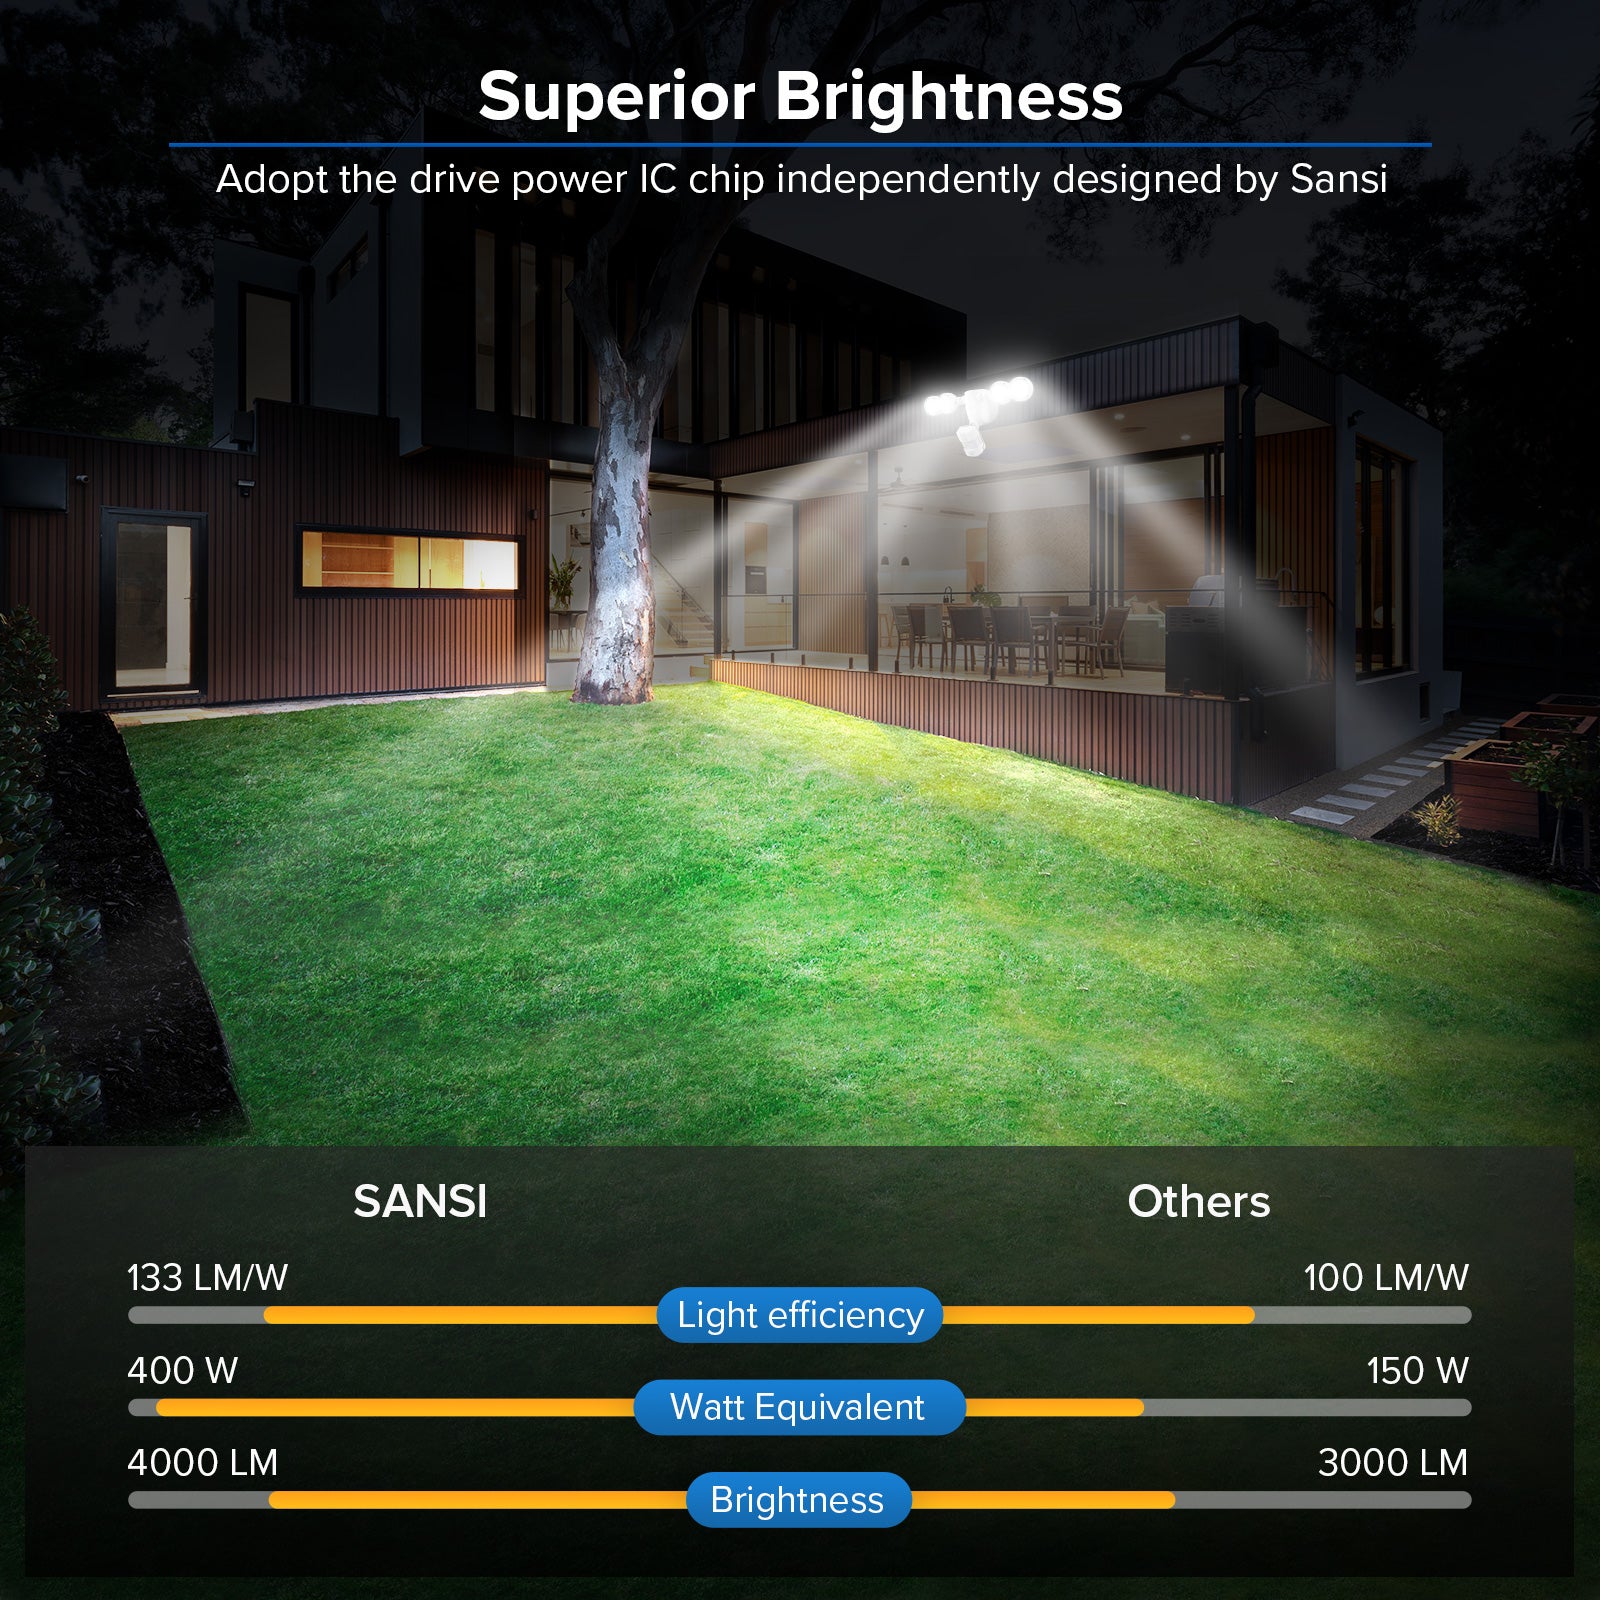 30W LED Security Light (Dusk to Dawn & Motion Sensor)  adopt the drive power IC chip independently designed by SANSI, superior brightness